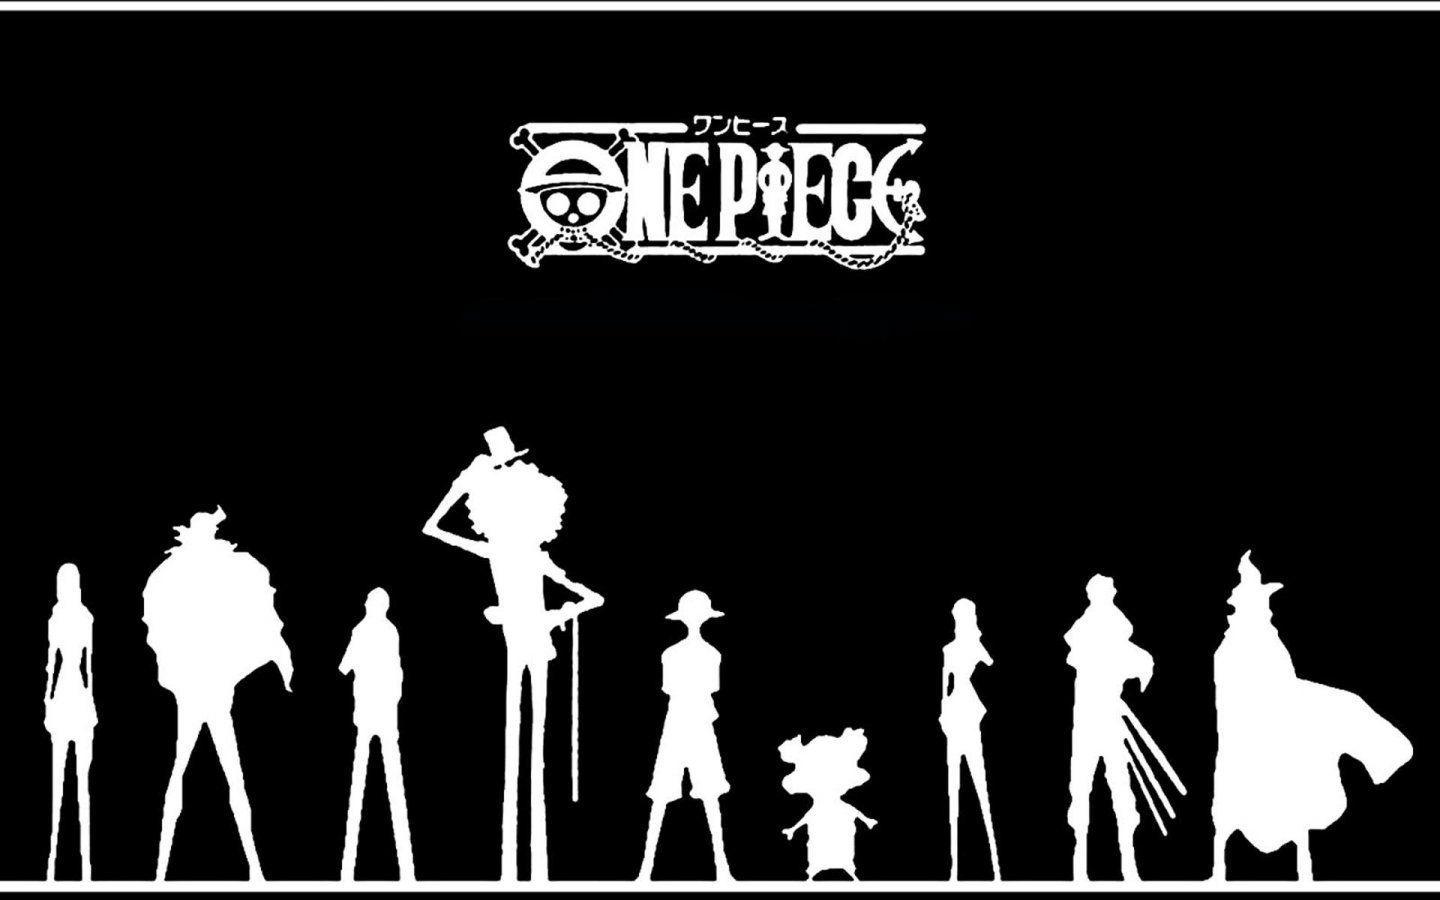 Black And White One Piece Image Wallpaper